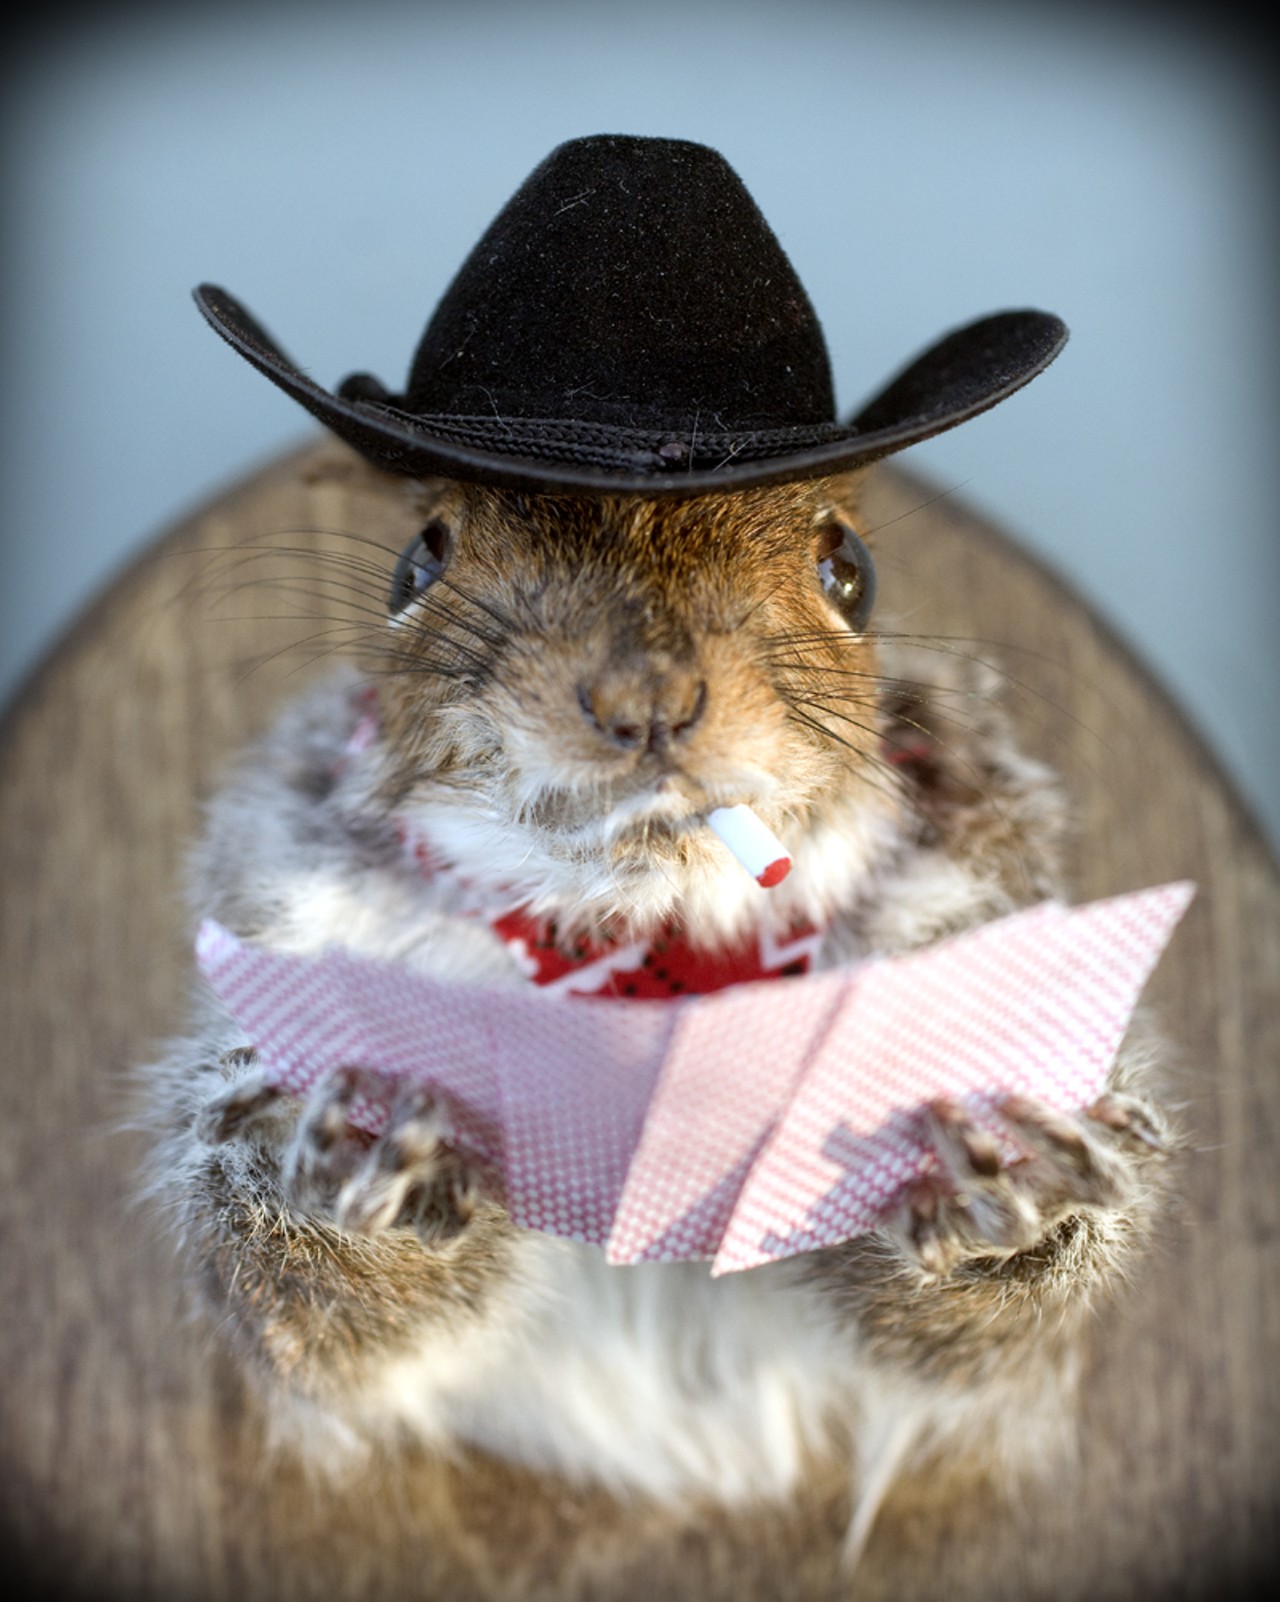 Even squirrels like a little Texas Hold 'Em, no?